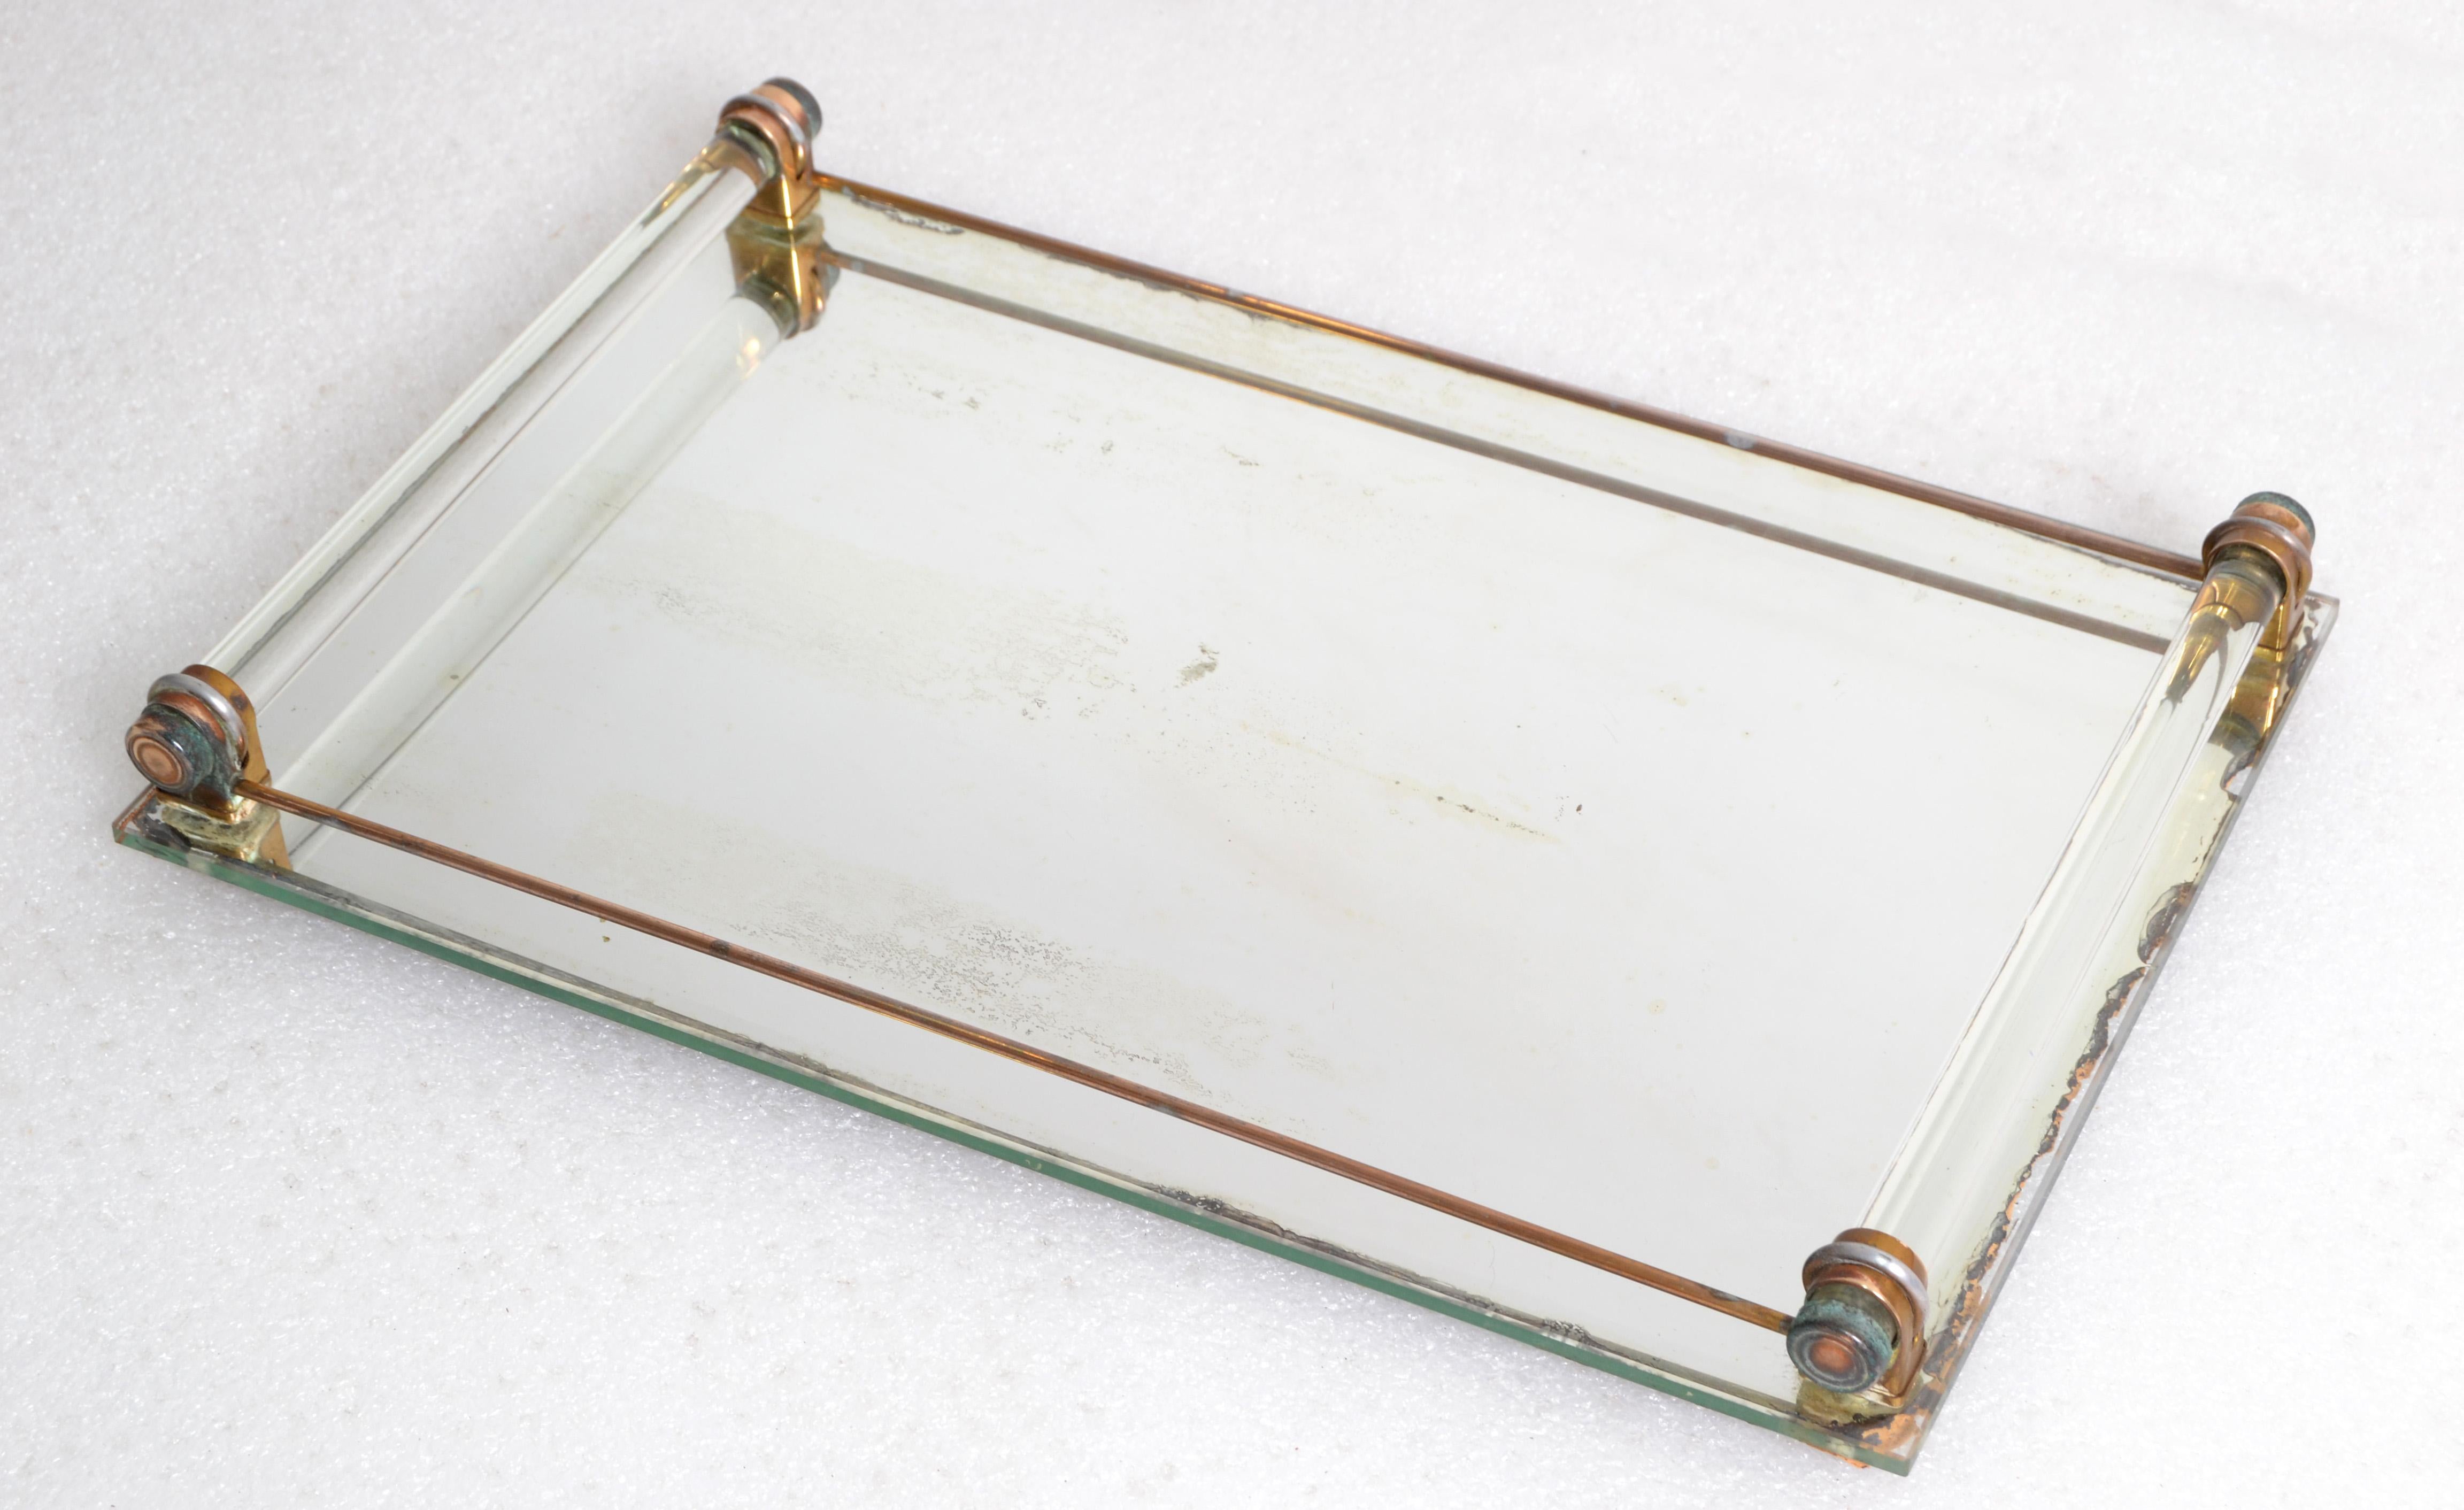 Art Deco Period Mirrored vanity tray or drink serving tray with copper frame and silver plate metal.
In all original condition with age related patina and foxing to the Mirror, but no chips or cracks.